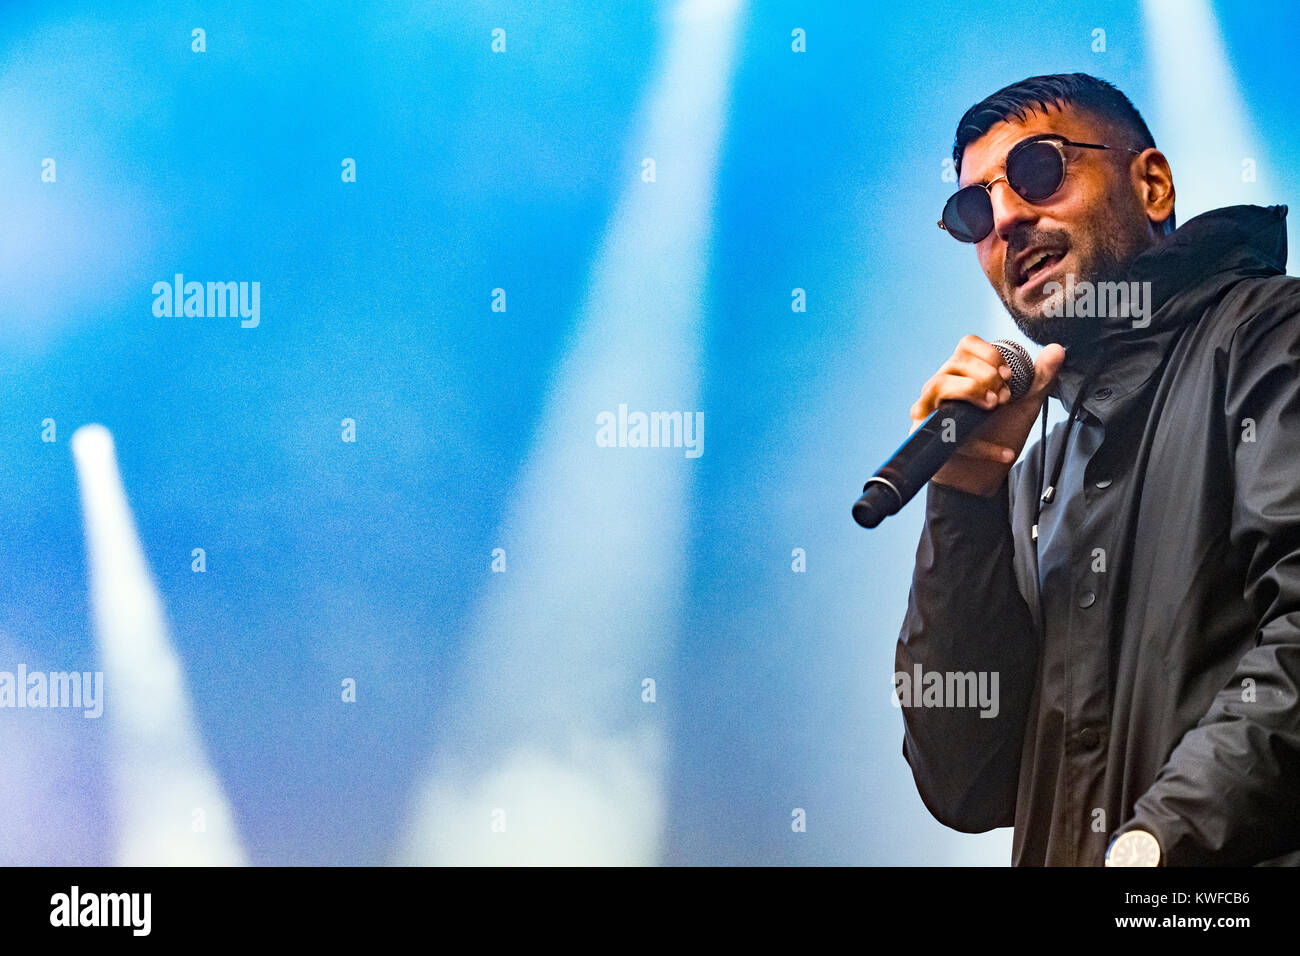 The Danish rapper Sivas (Stylized S!vas) performs a live concert at Danish music festival SmukFest 2016. Sivas mess up the Danish dictionary combining Danish, English and Arabian in one big ghetto mixture. Denmark, 07/08 2016. Stock Photo